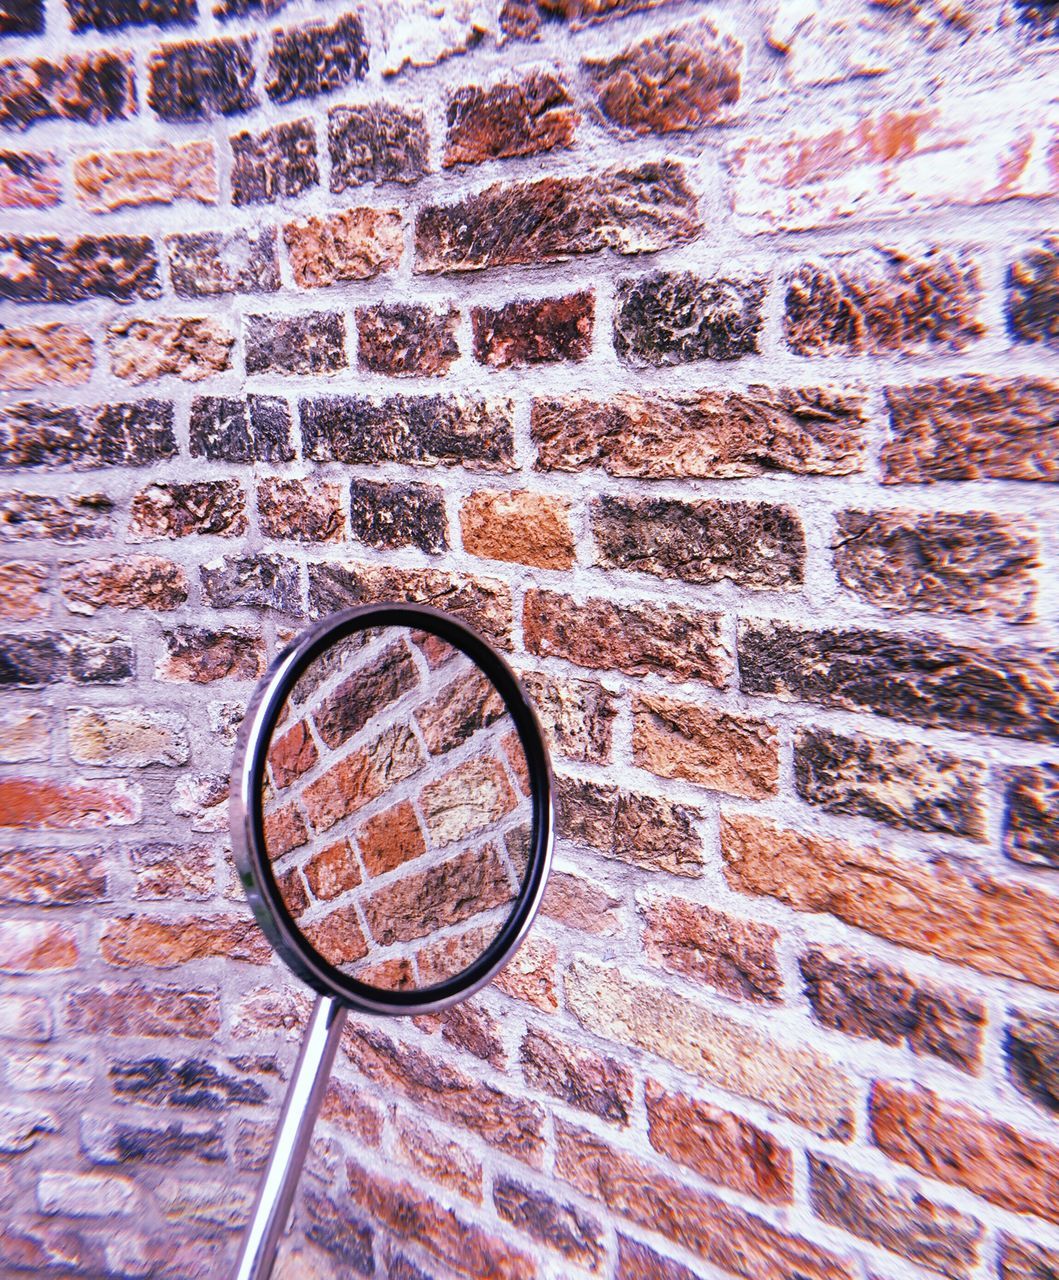 brick, brick wall, wall, day, no people, wall - building feature, close-up, backgrounds, circle, geometric shape, textured, architecture, pattern, full frame, magnifying glass, metal, built structure, outdoors, glass - material, shape, textured effect